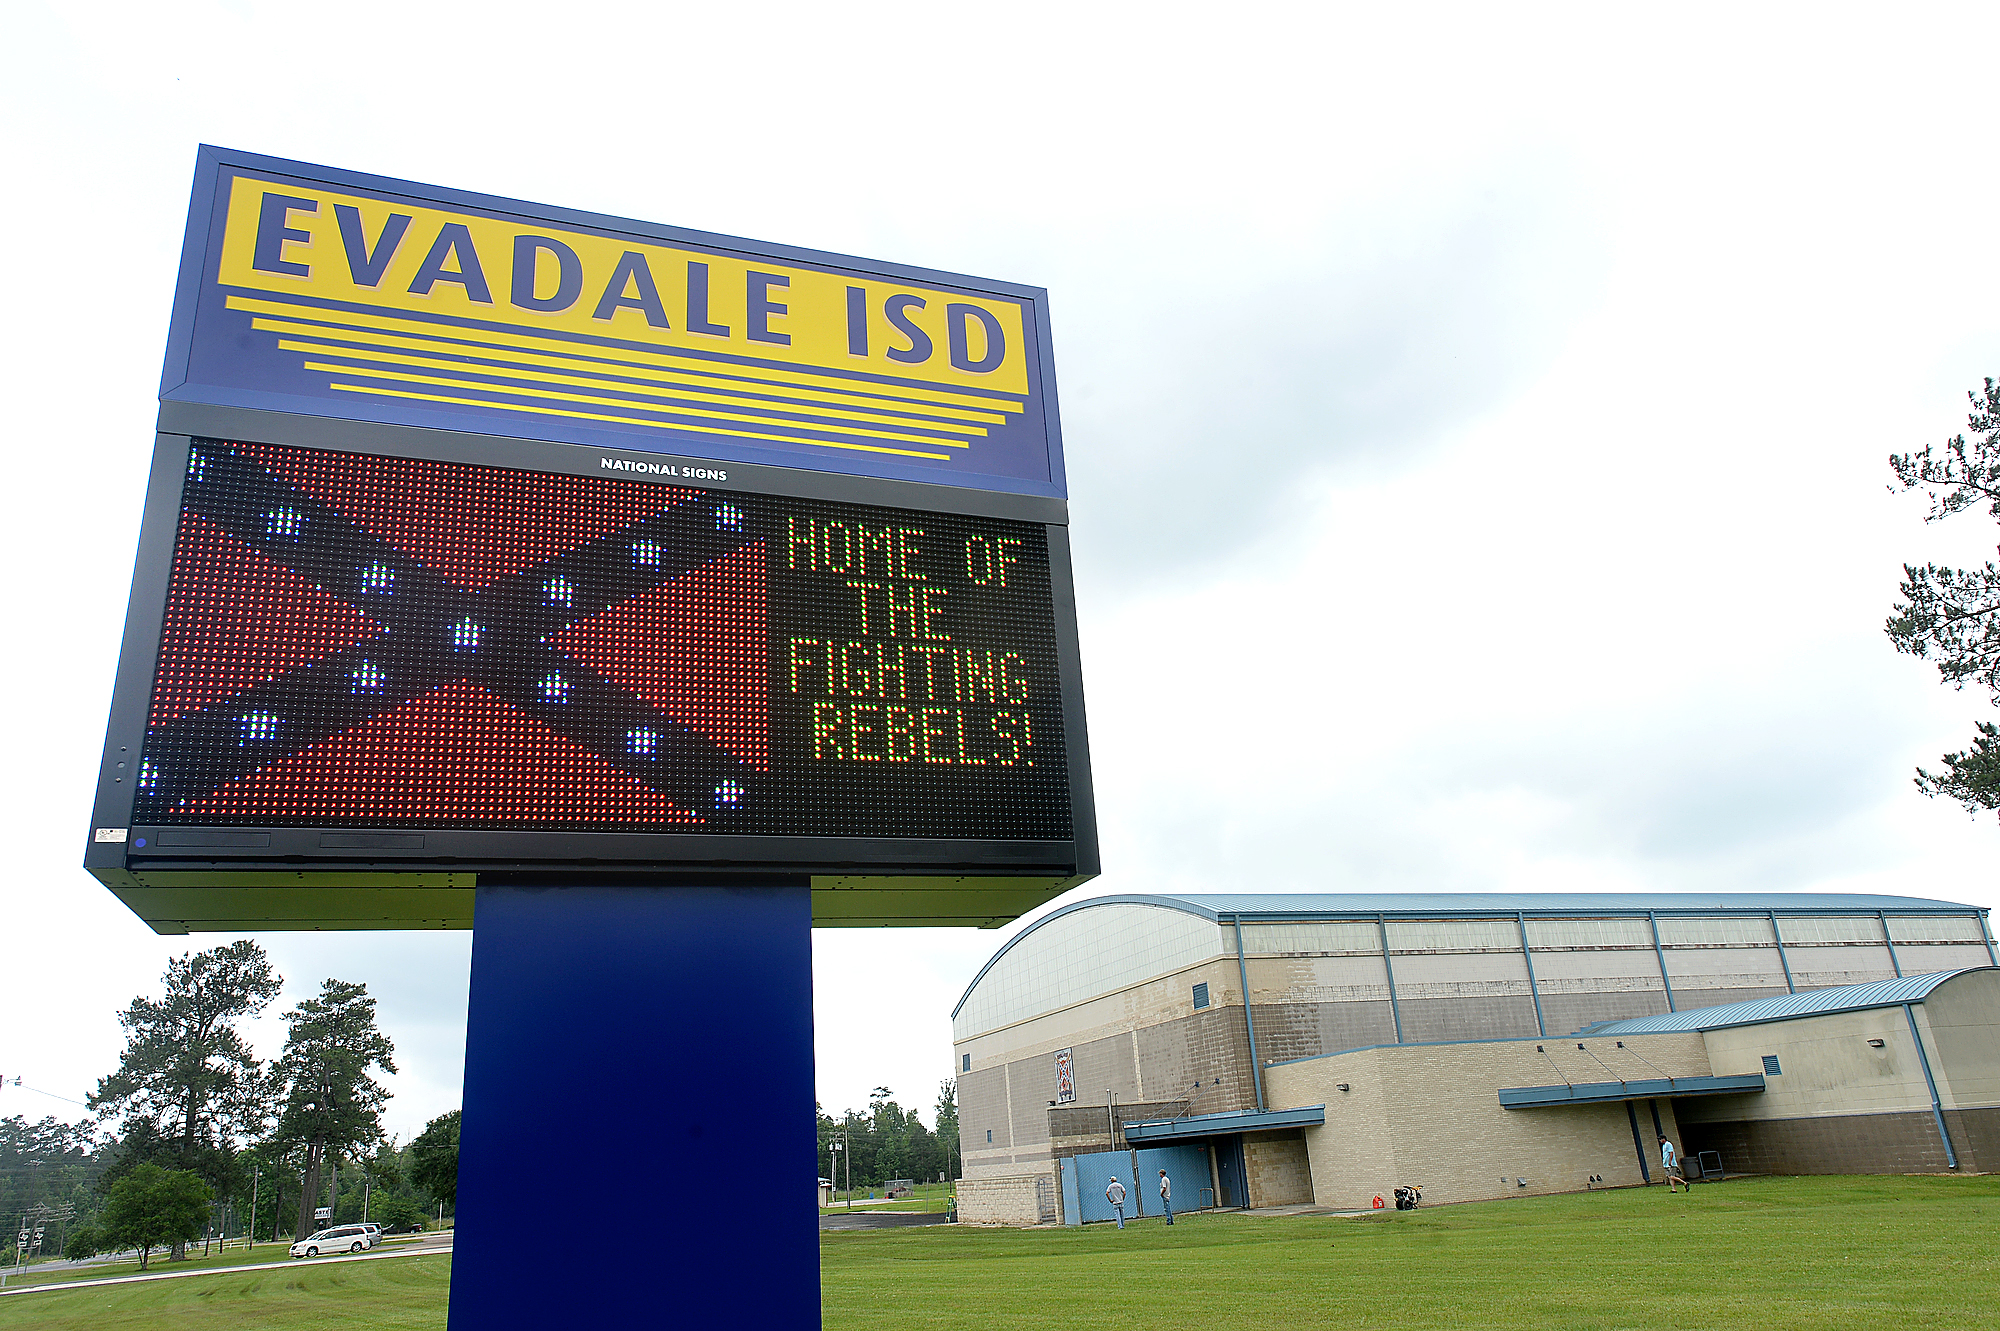 New Evadale ISD sign leaves out Confederateera emblem Beaumont